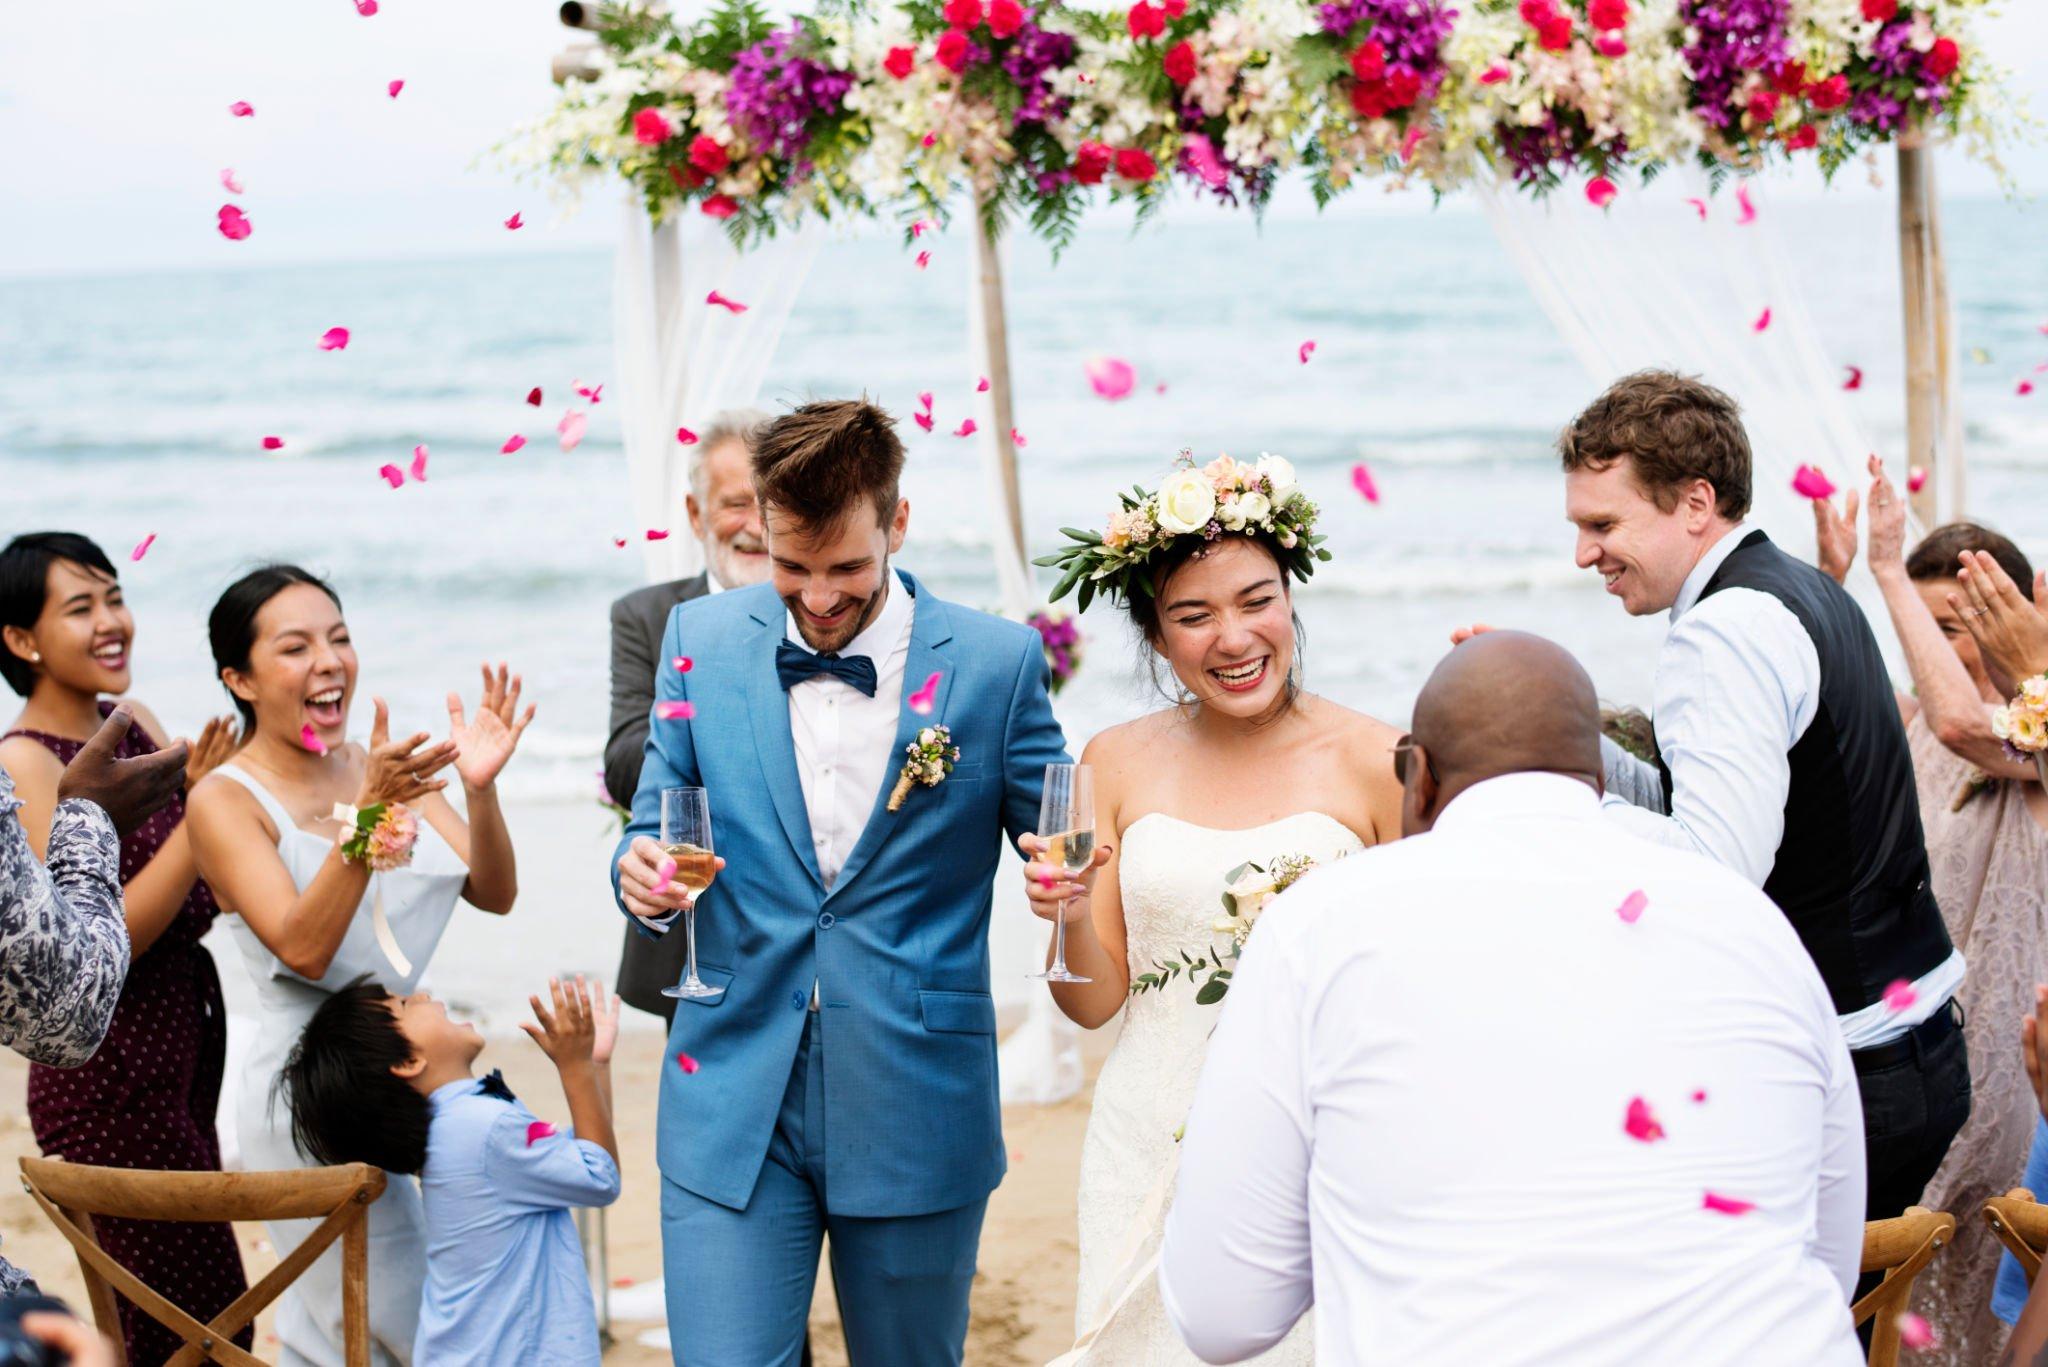 Pros and Cons of Celebrating Your Wedding at the Beach